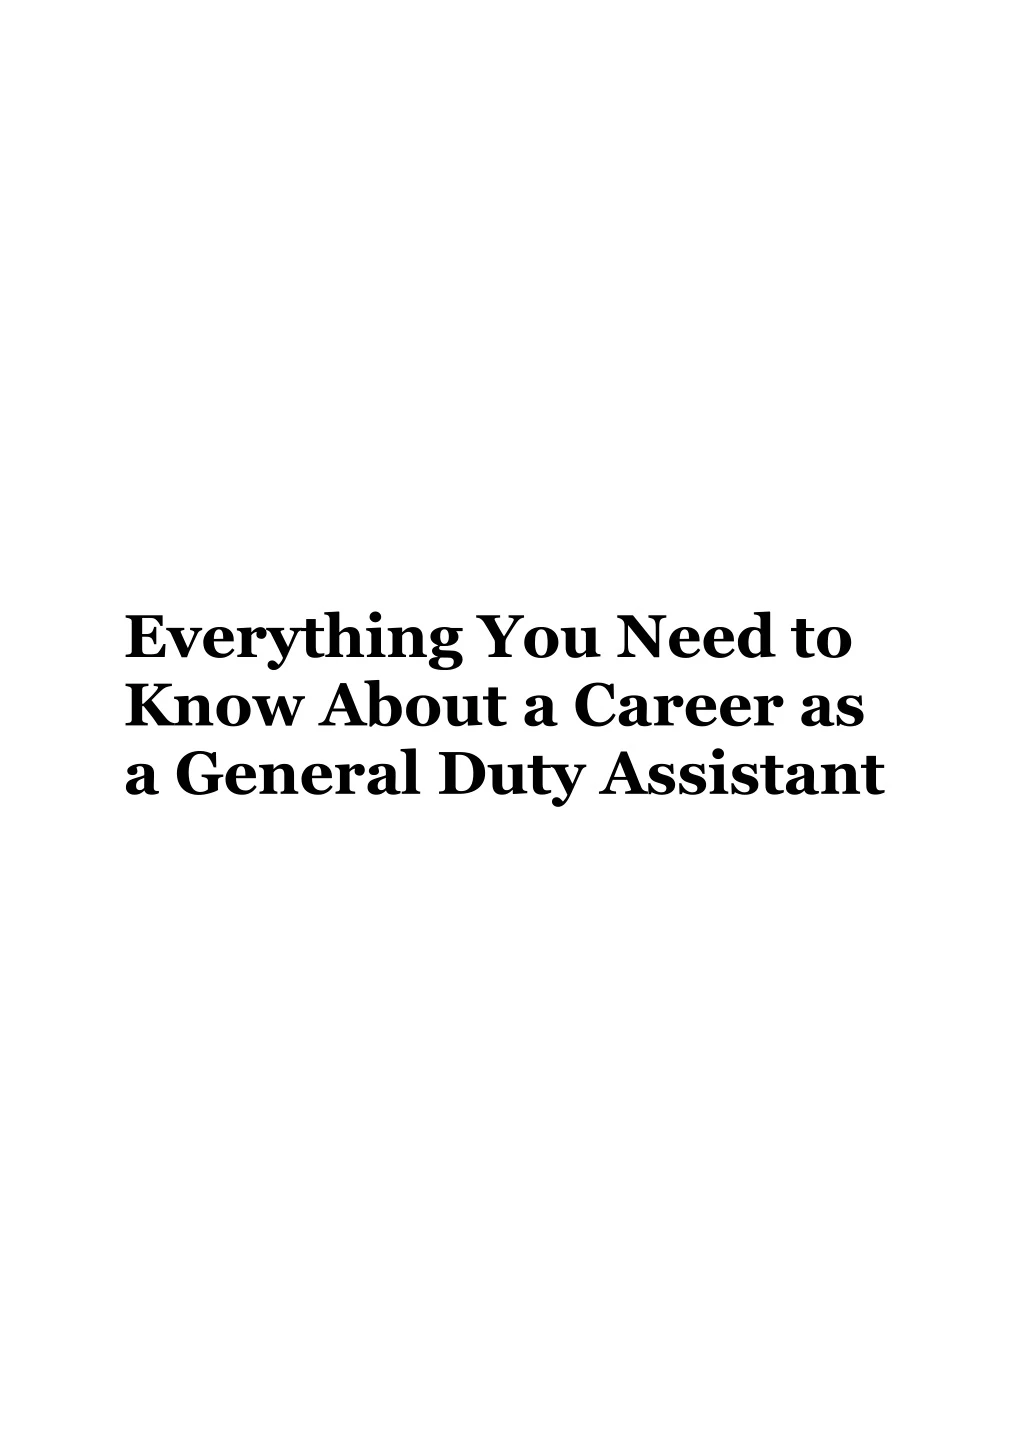 everything you need to know about a career